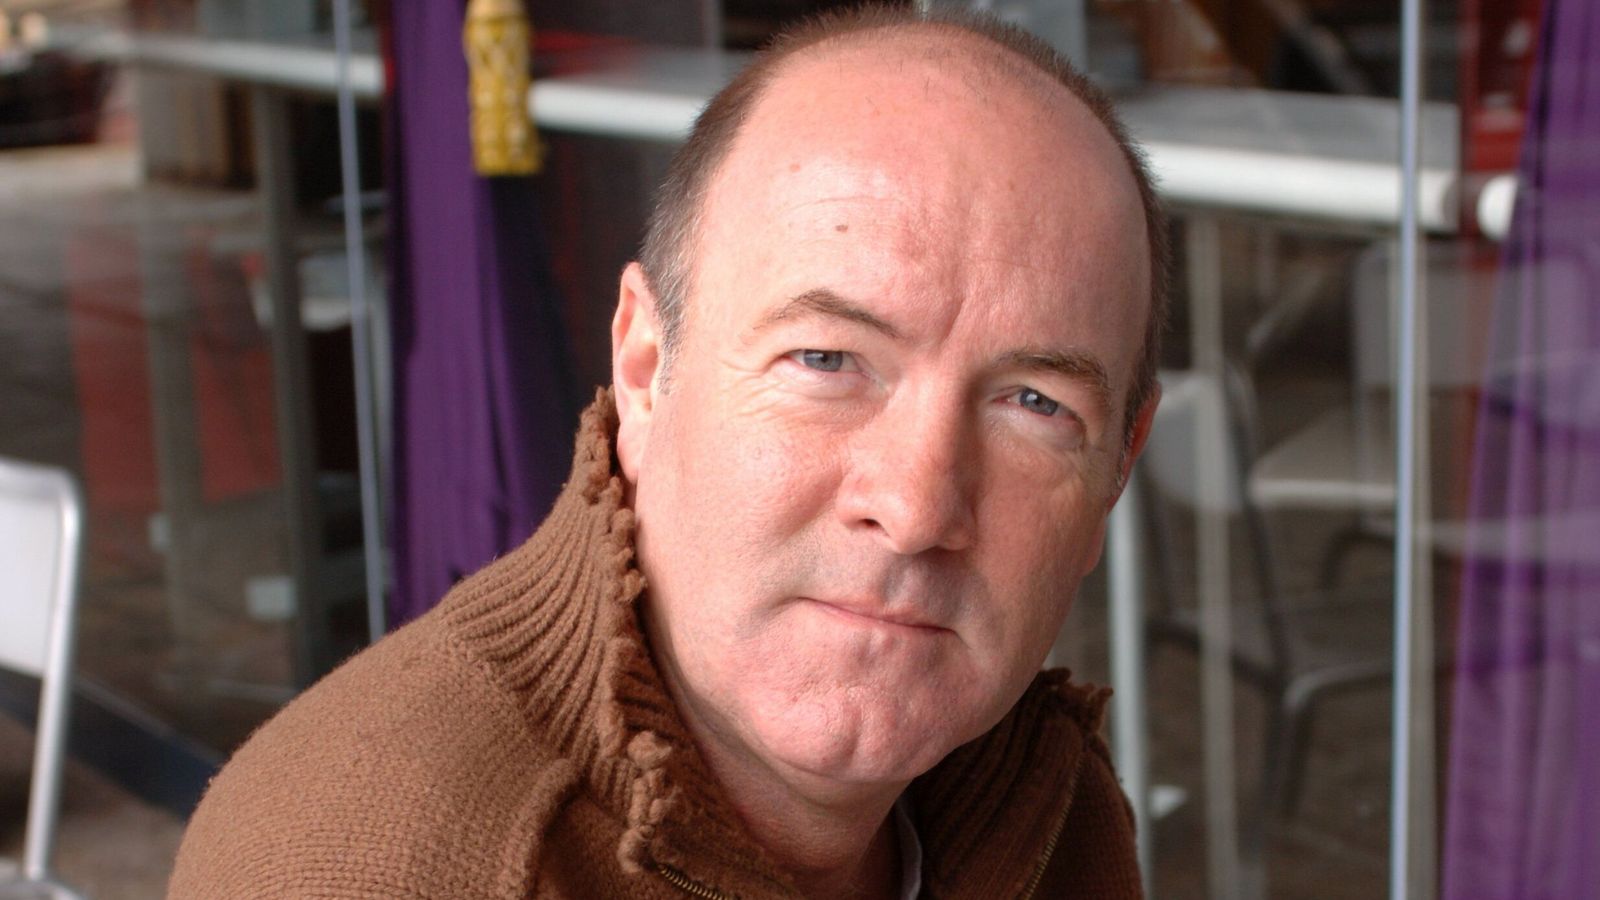 Brookside actor Dean Sullivan, who played Jimmy Corkhill, dies aged 68